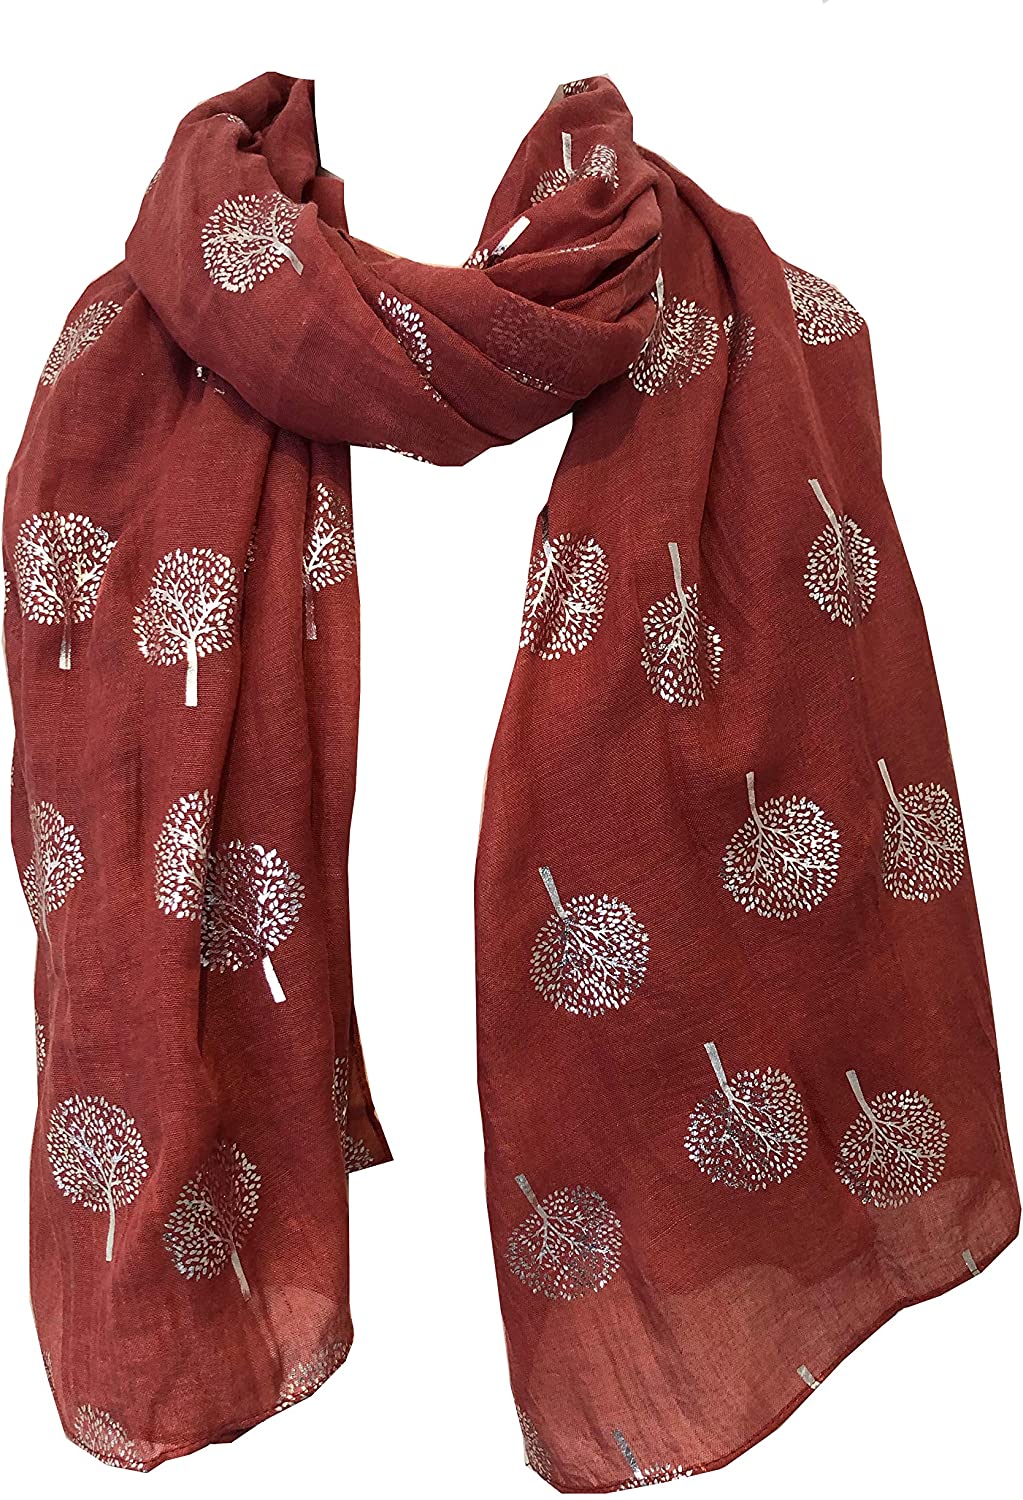 Pamper Yourself Now Rusty red with Silver Foiled Mulberry Tree Design Ladies Scarf/wrap. Great Present for Mum, Sister, Girlfriend or Wife.